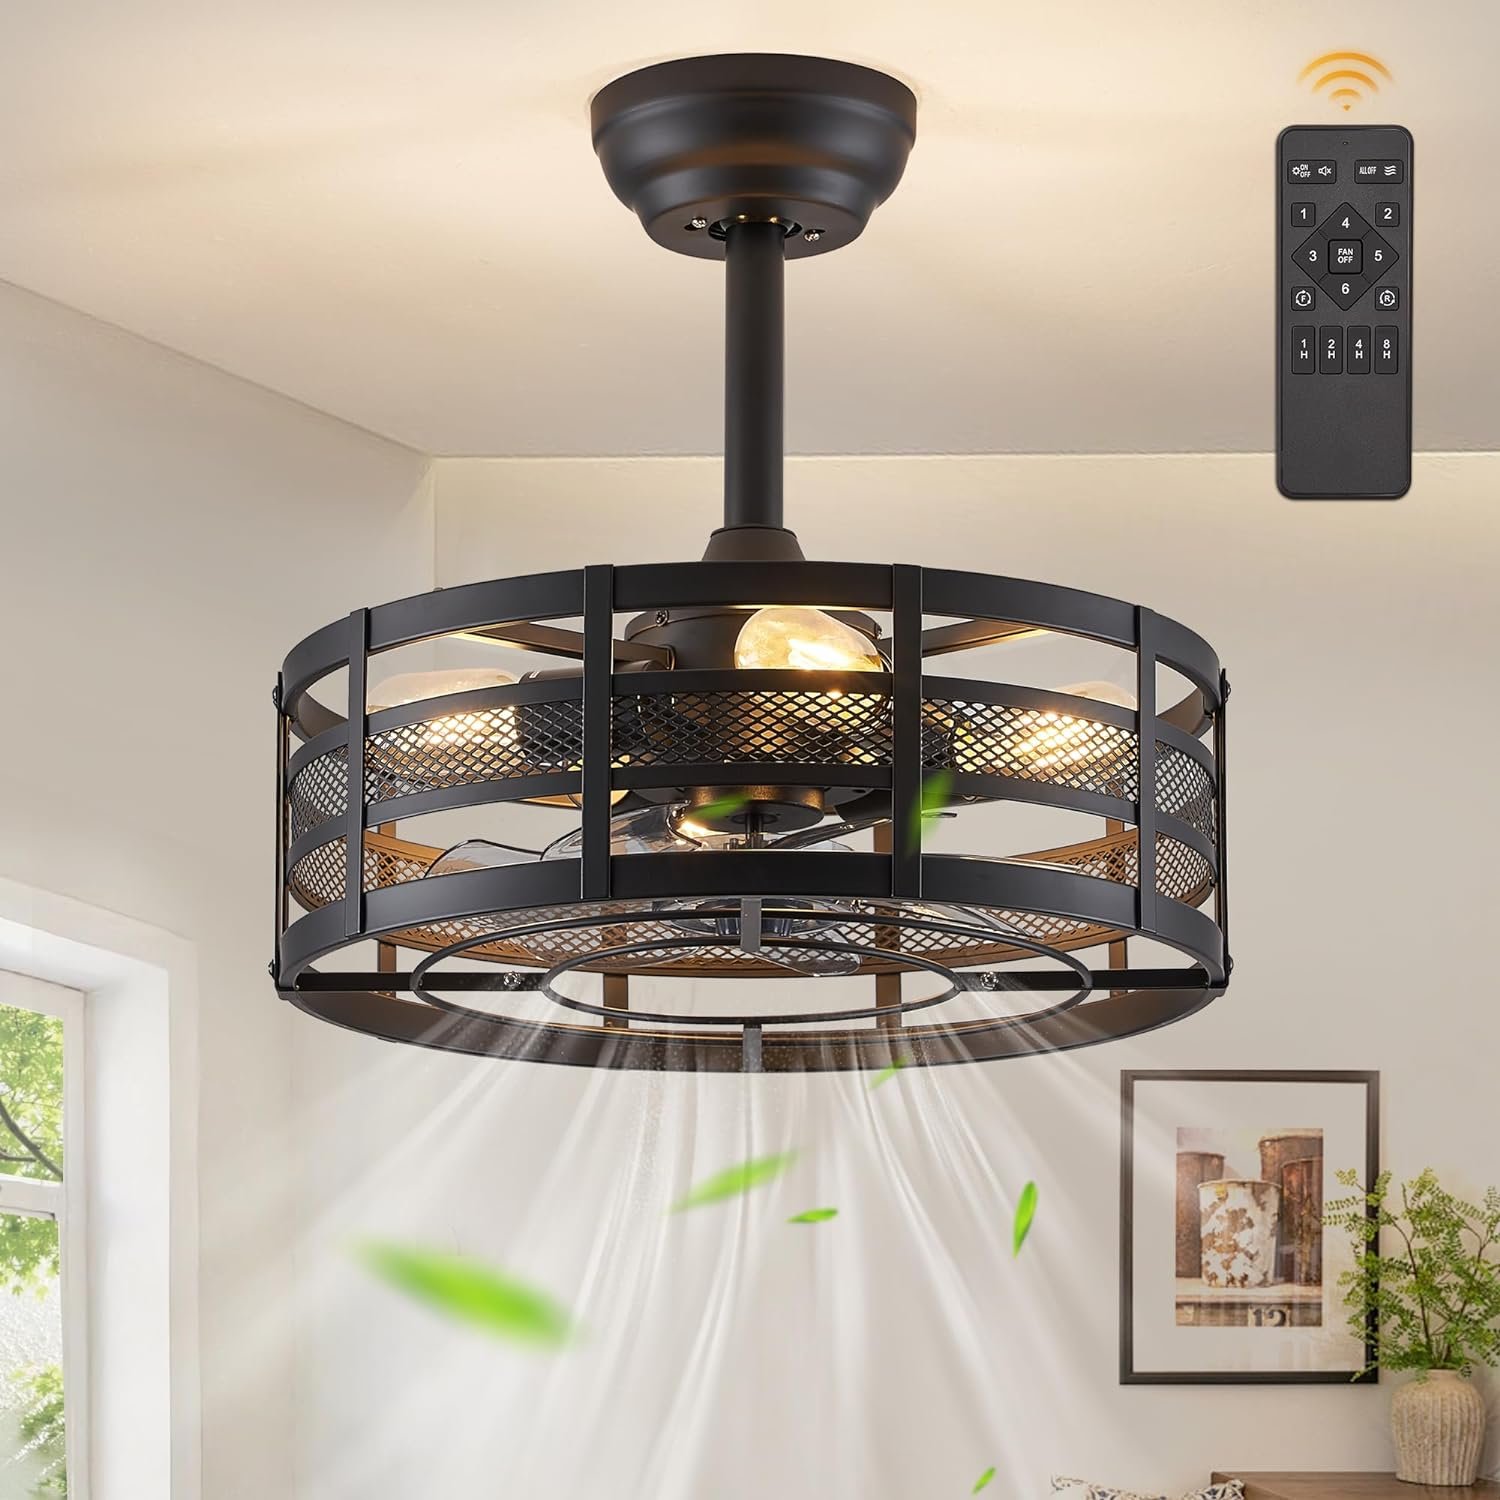 16in Caged Ceiling Fans with Lights and Remote, Bladeless Fandelier Ceiling Fan with 6 Speeds and Timing, Farmhouse Samll Fan Lights Ceiling Fixtures For Kitchen, Bedroom, Outdoor-Black X